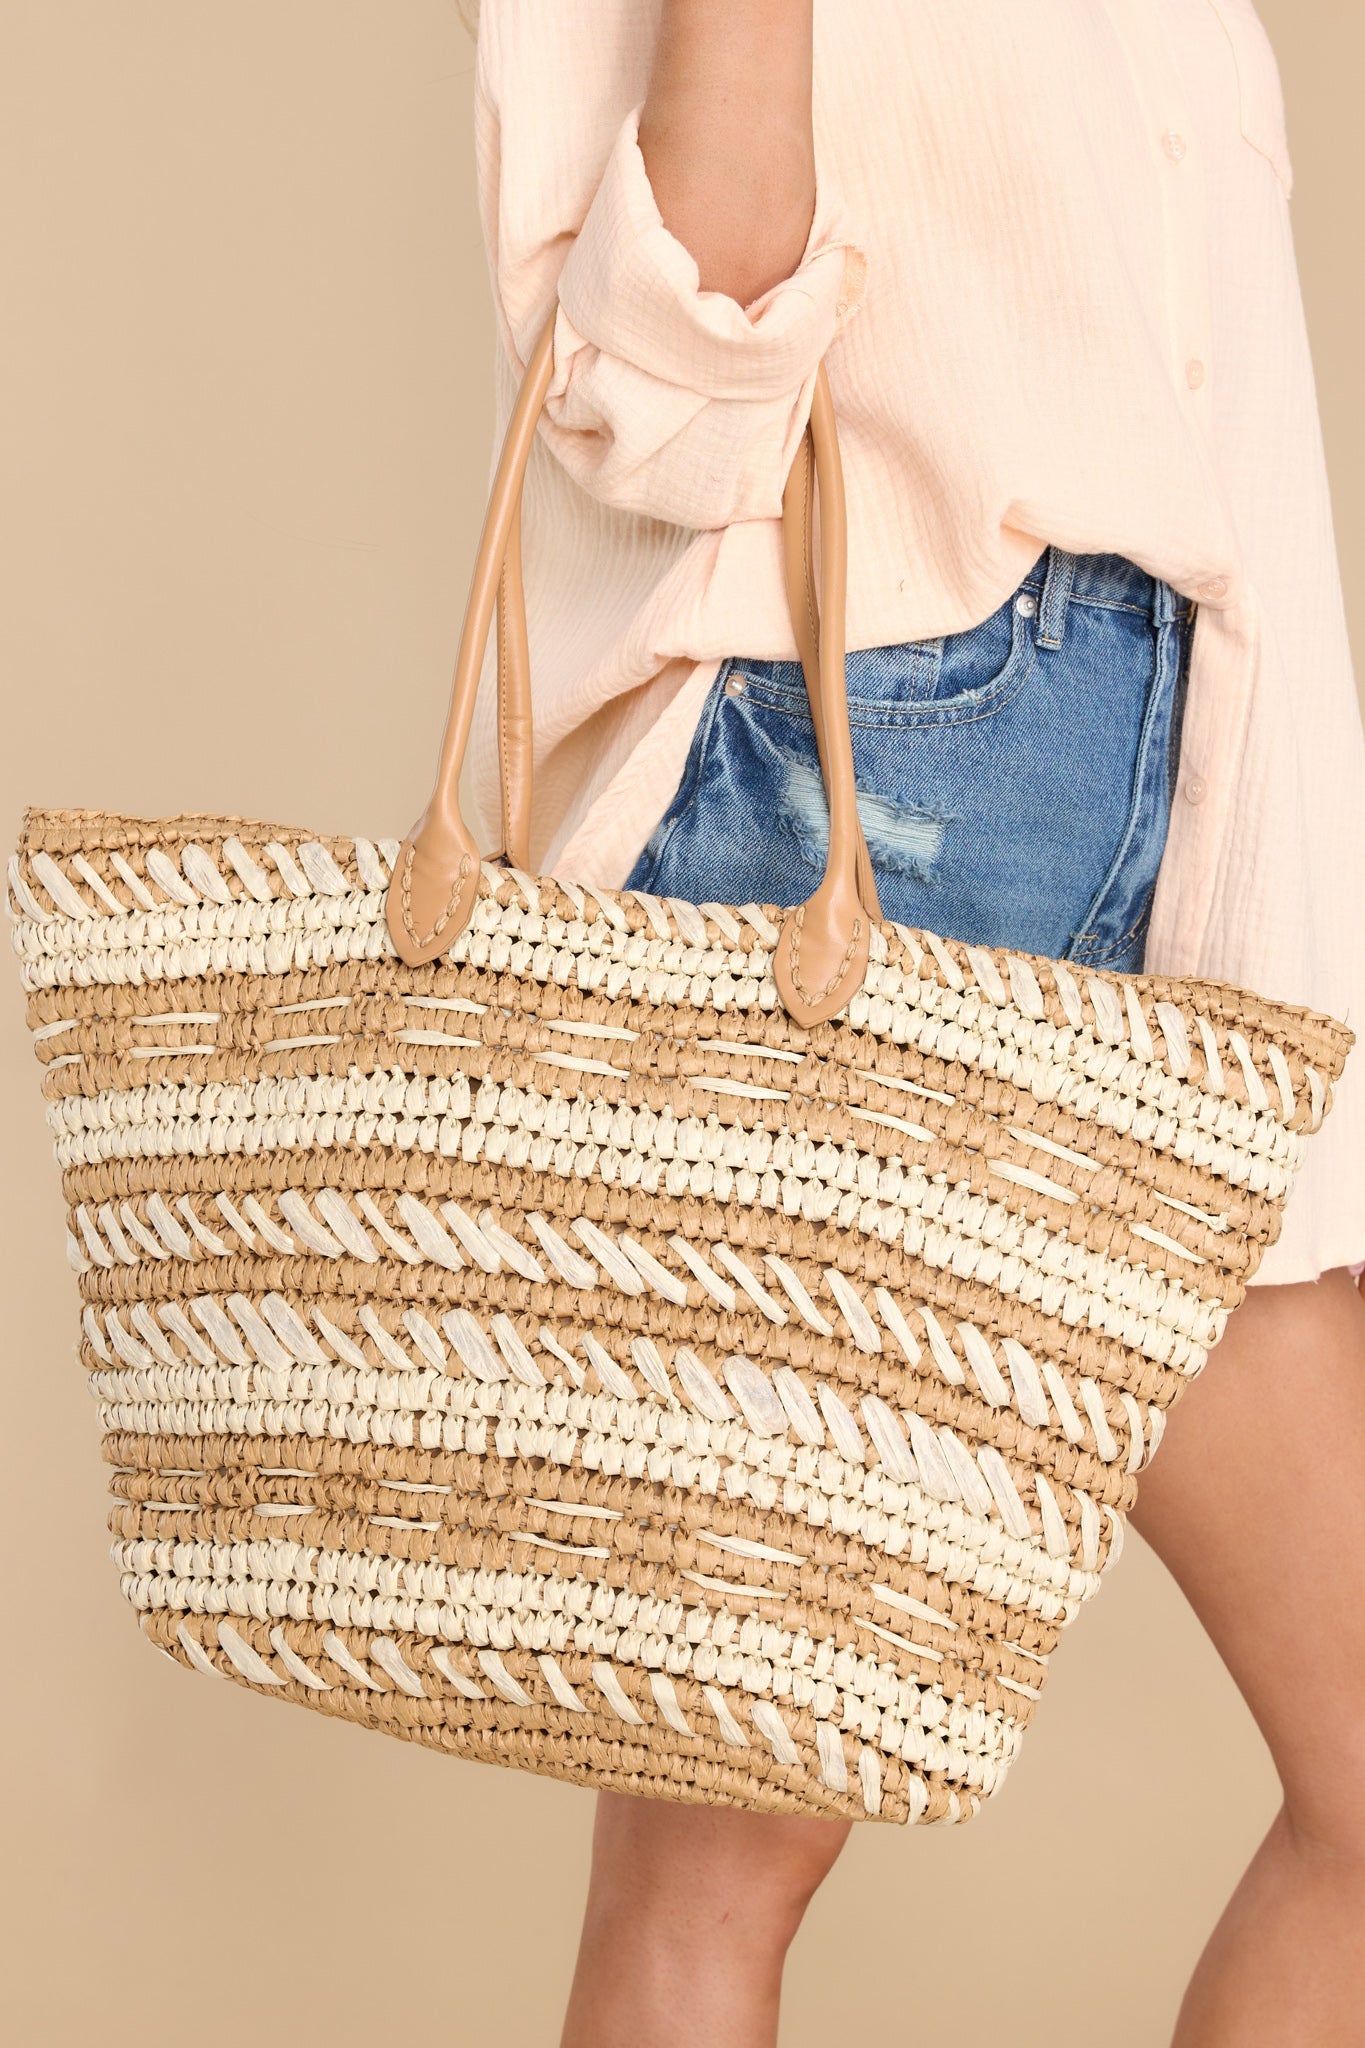 Ready For Adventures Tan Rattan Bag - Red Dress